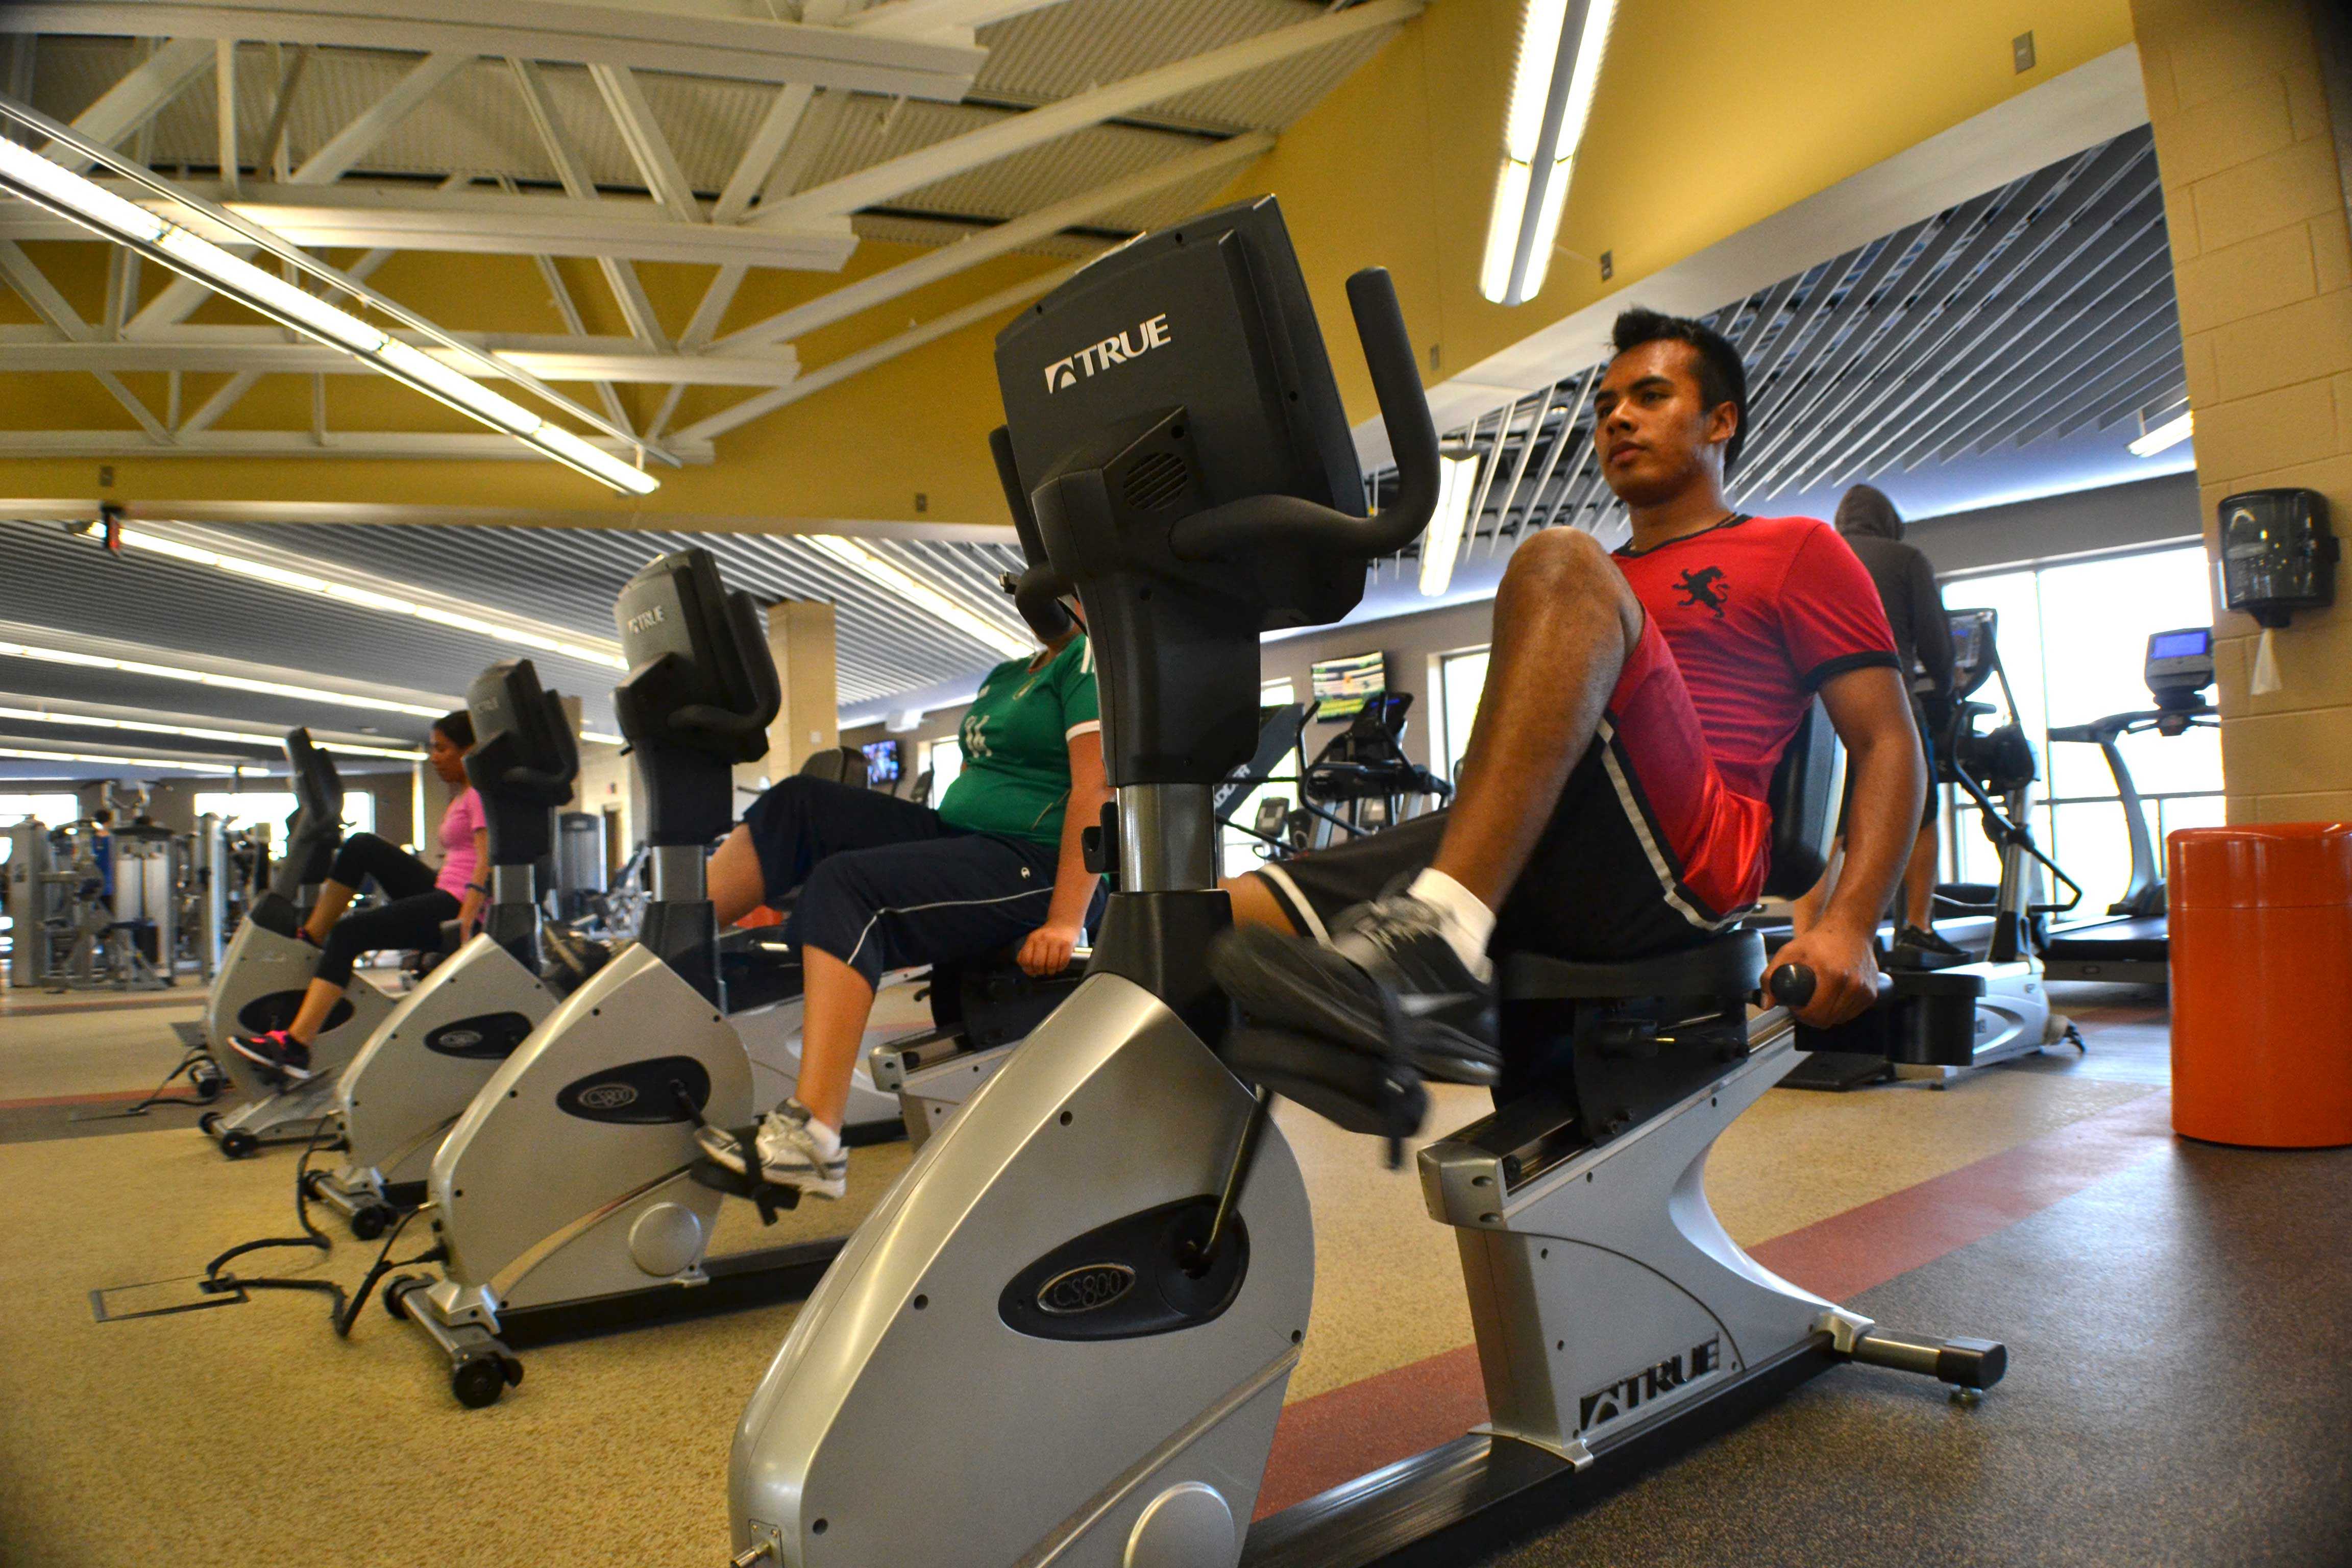 UofL students to get state of the art recreation center